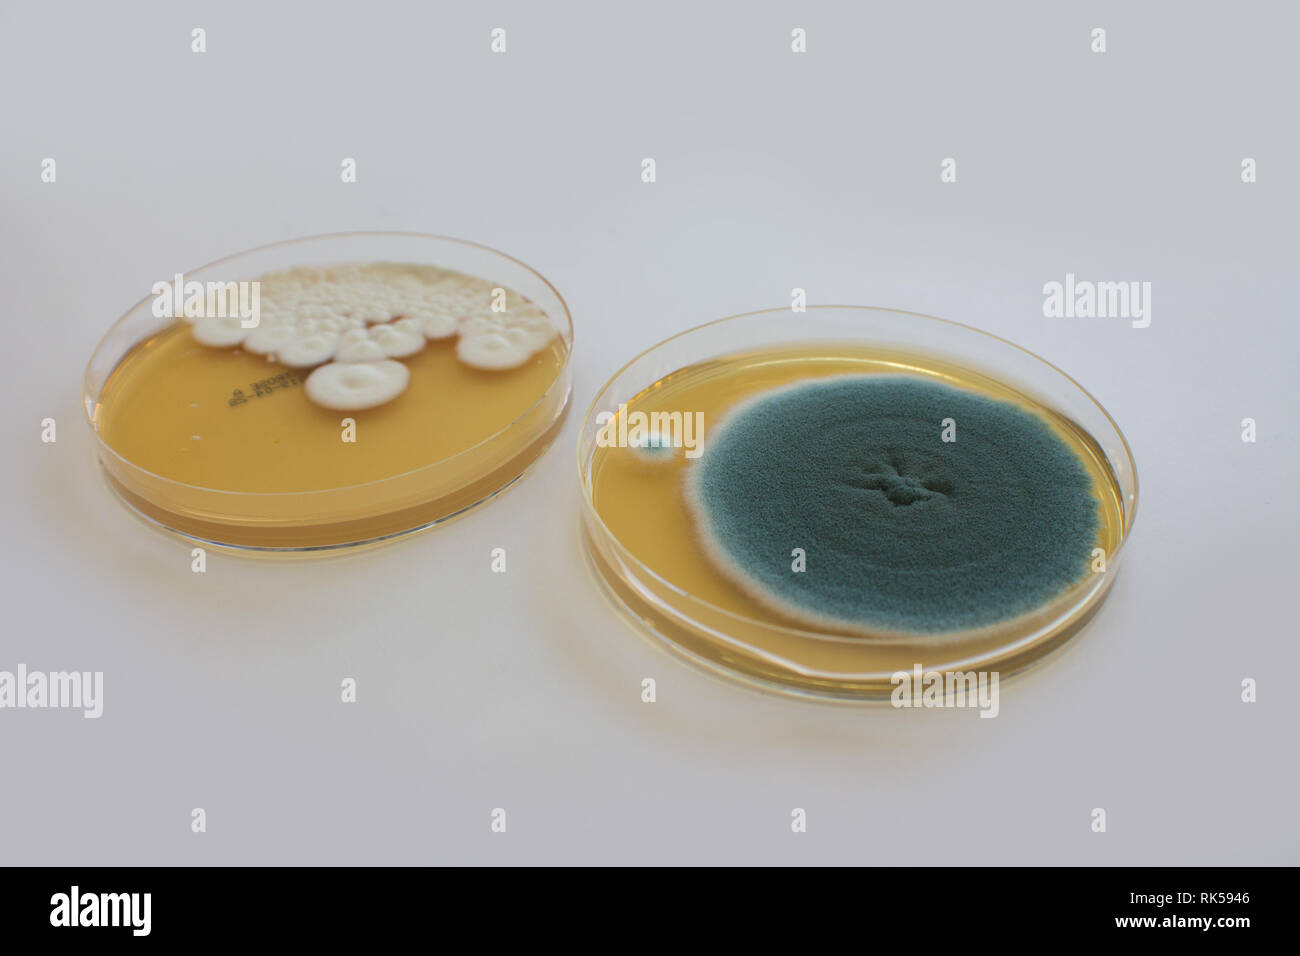 mould fungus test kit Stock Photo